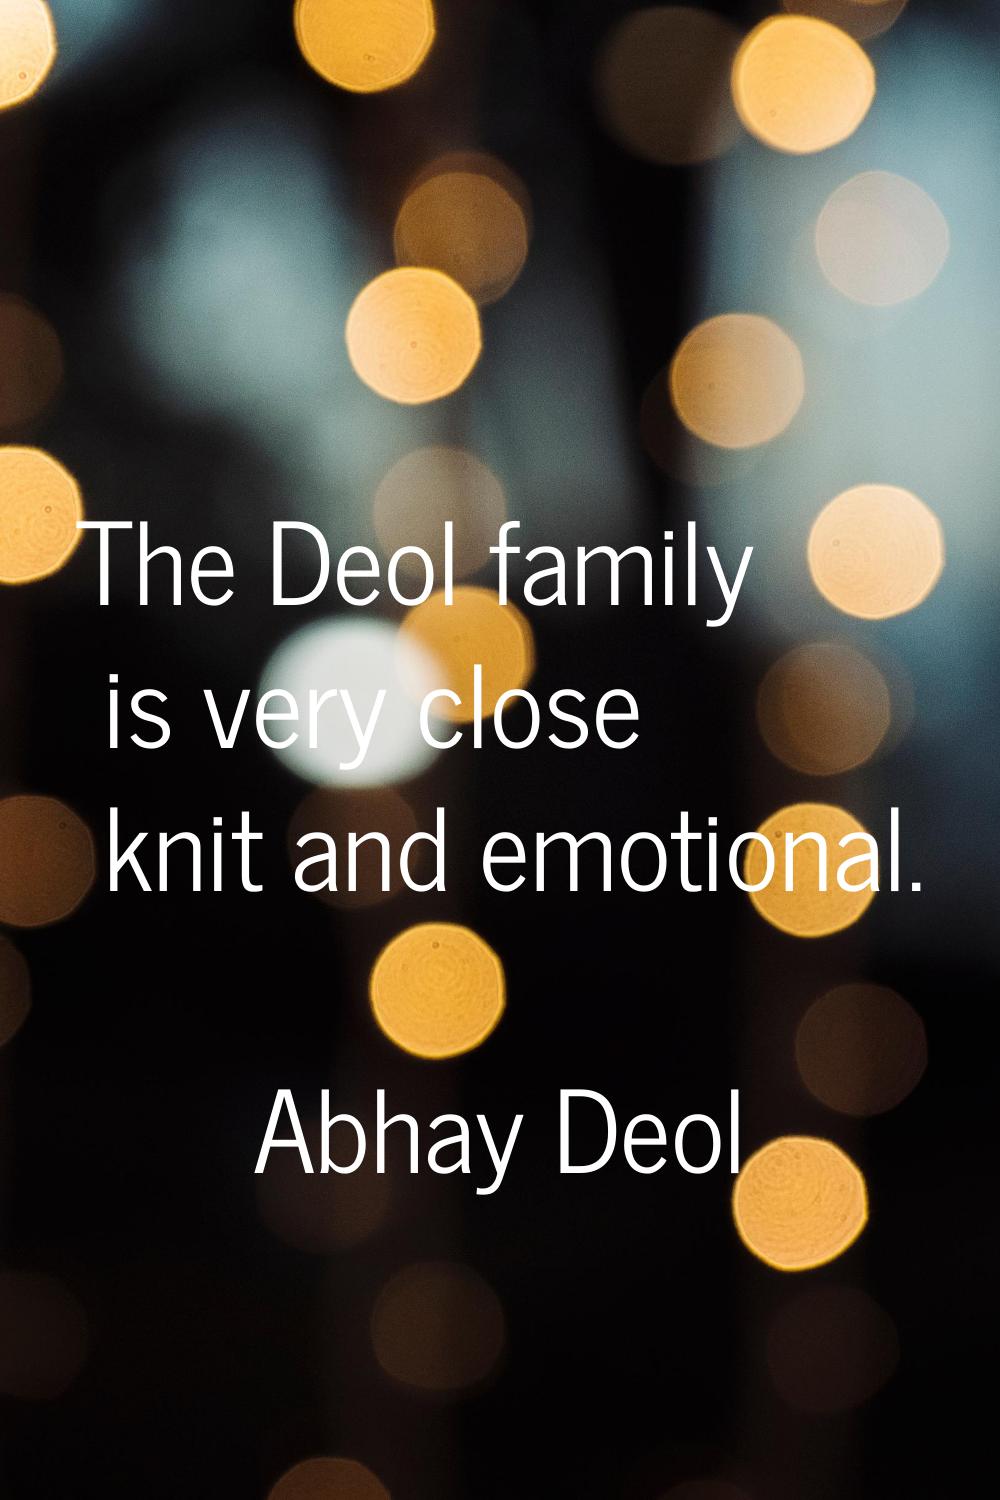 The Deol family is very close knit and emotional.